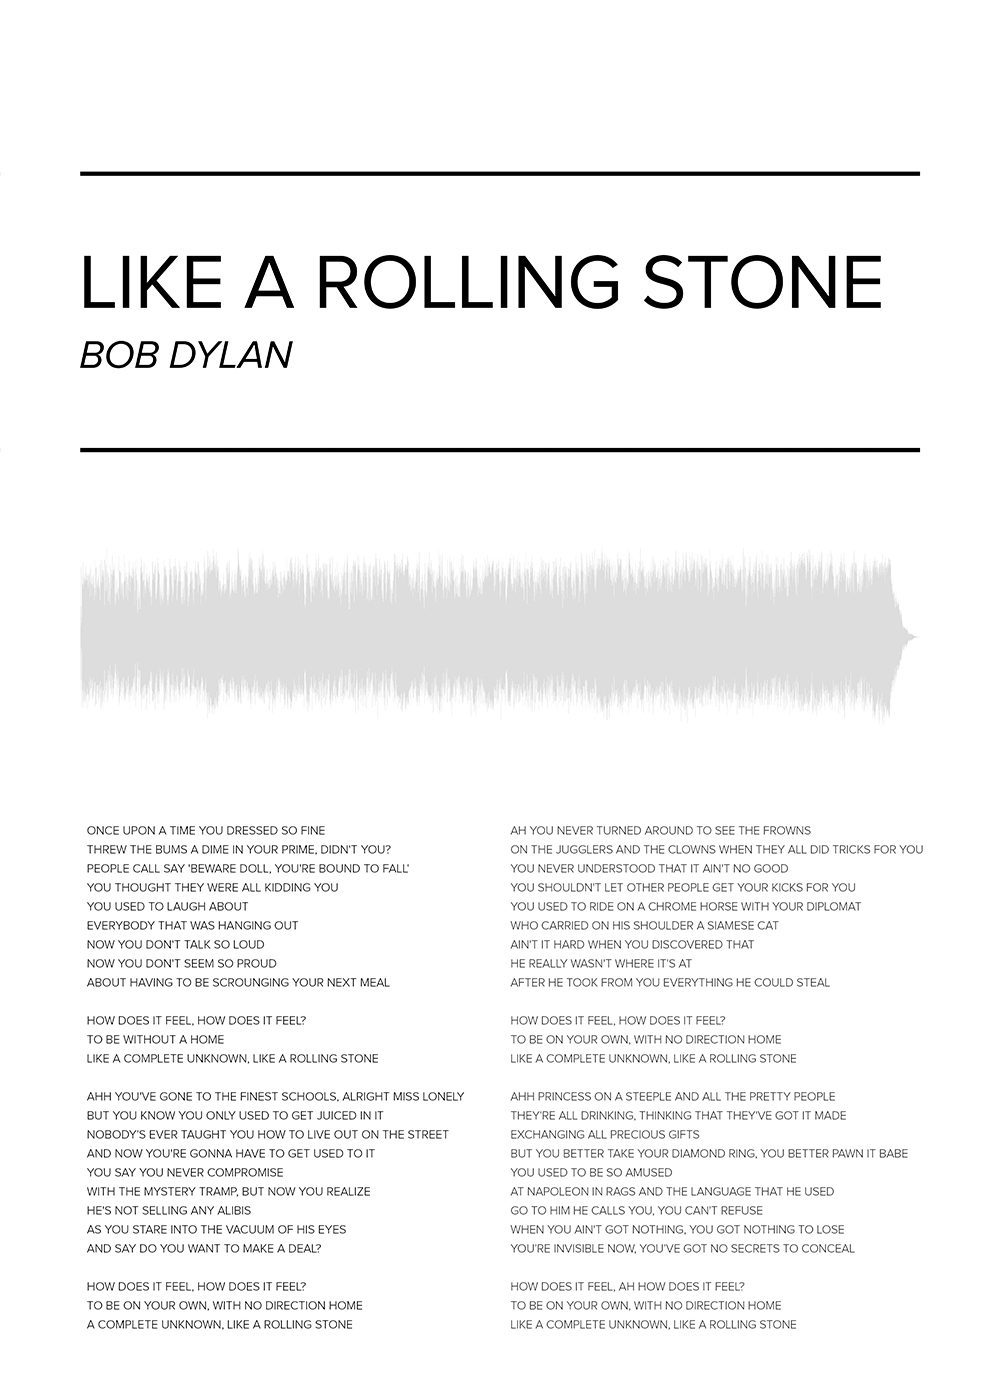 Bob Dylan - Like a Rolling Stone Poster